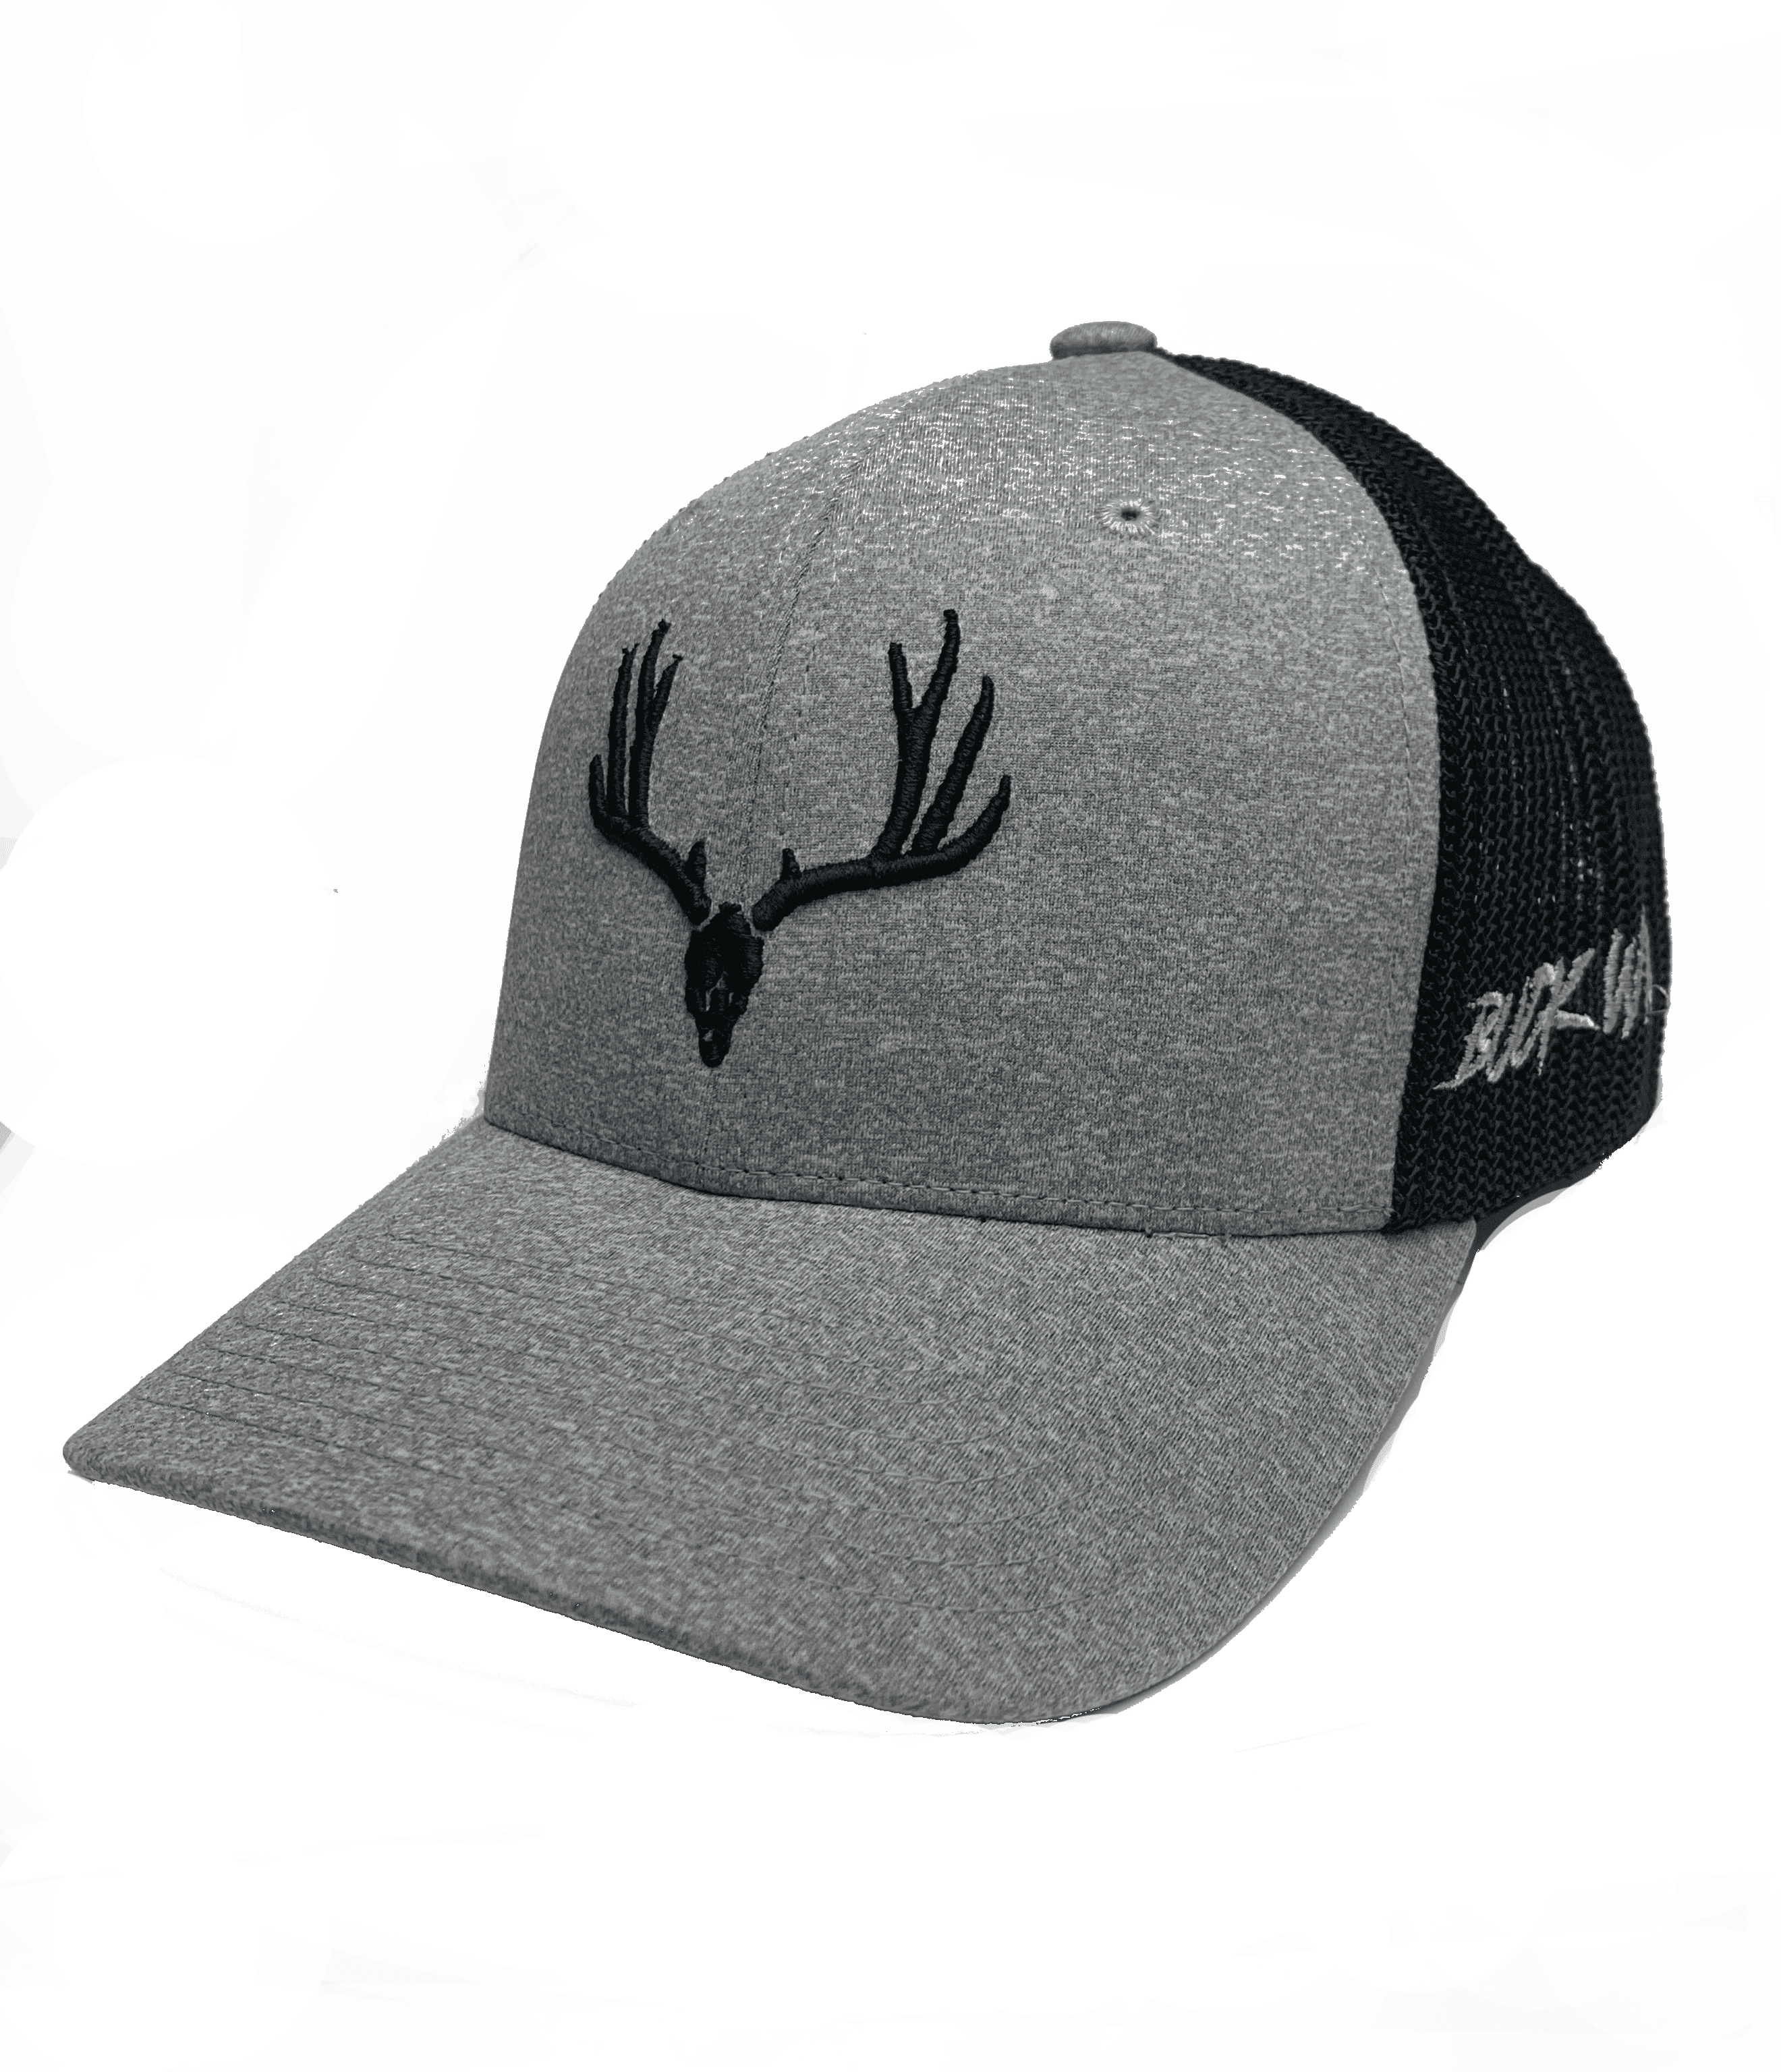 Buck Wild Charcoal Gray Logo Flex Hat Red Black OSFA With Fit Hat or